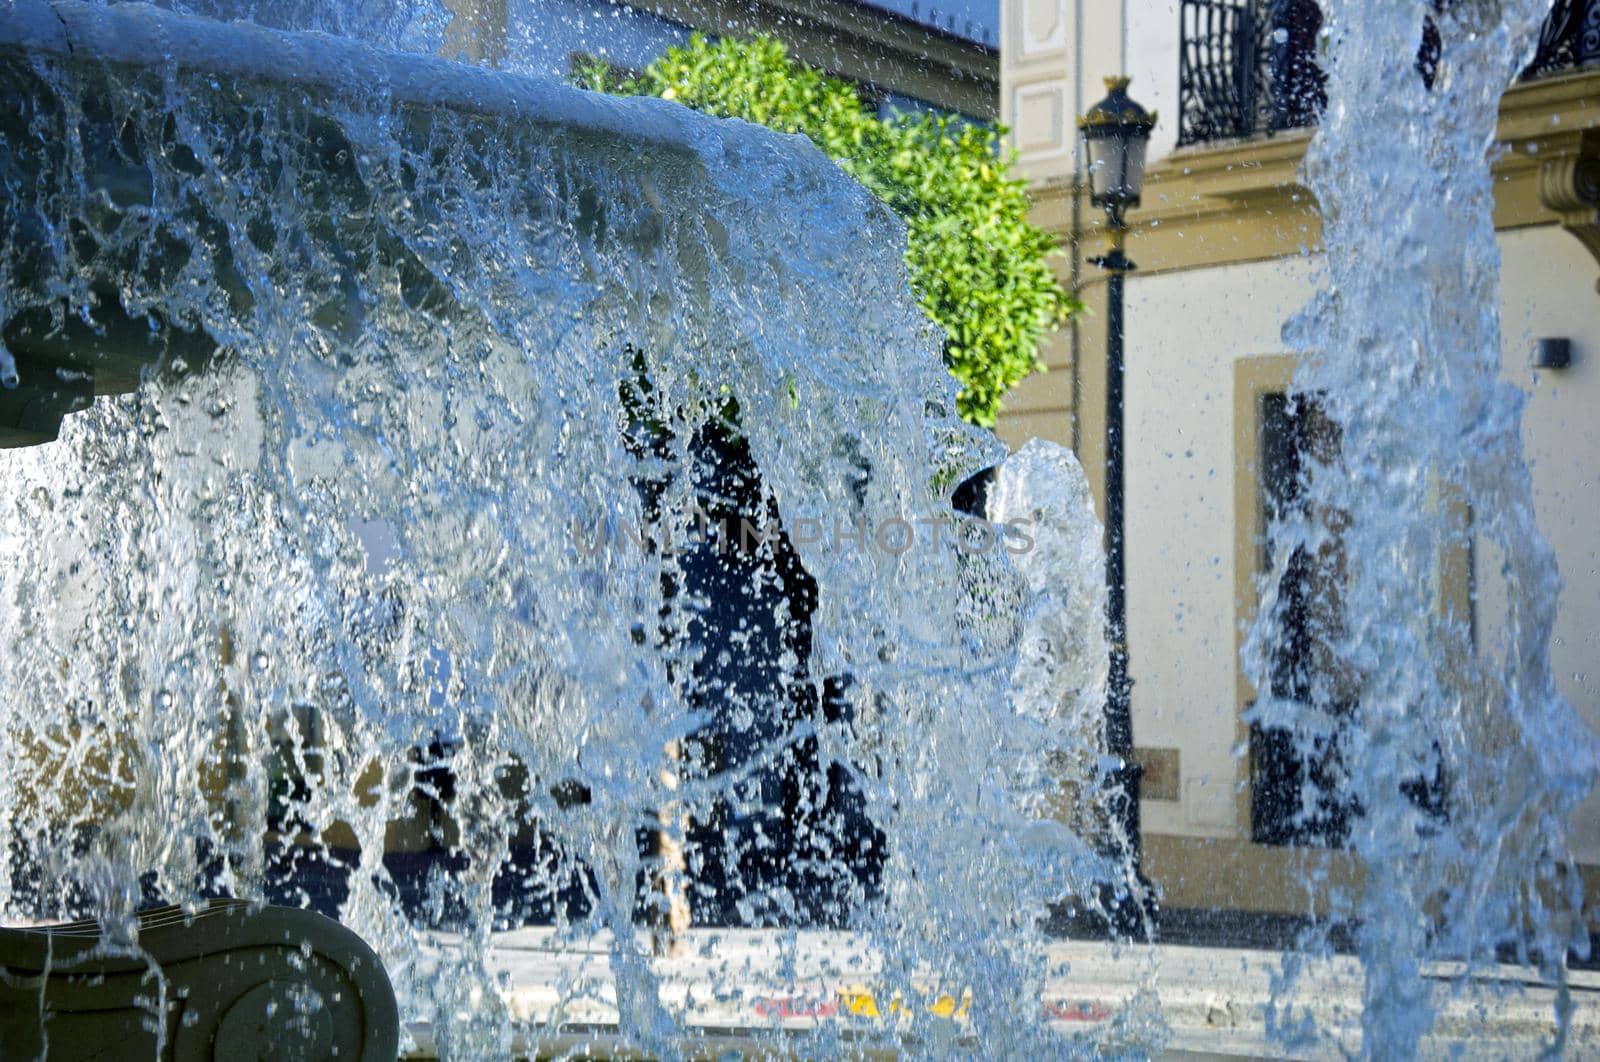 Fontain and water splashes, summer time, close up